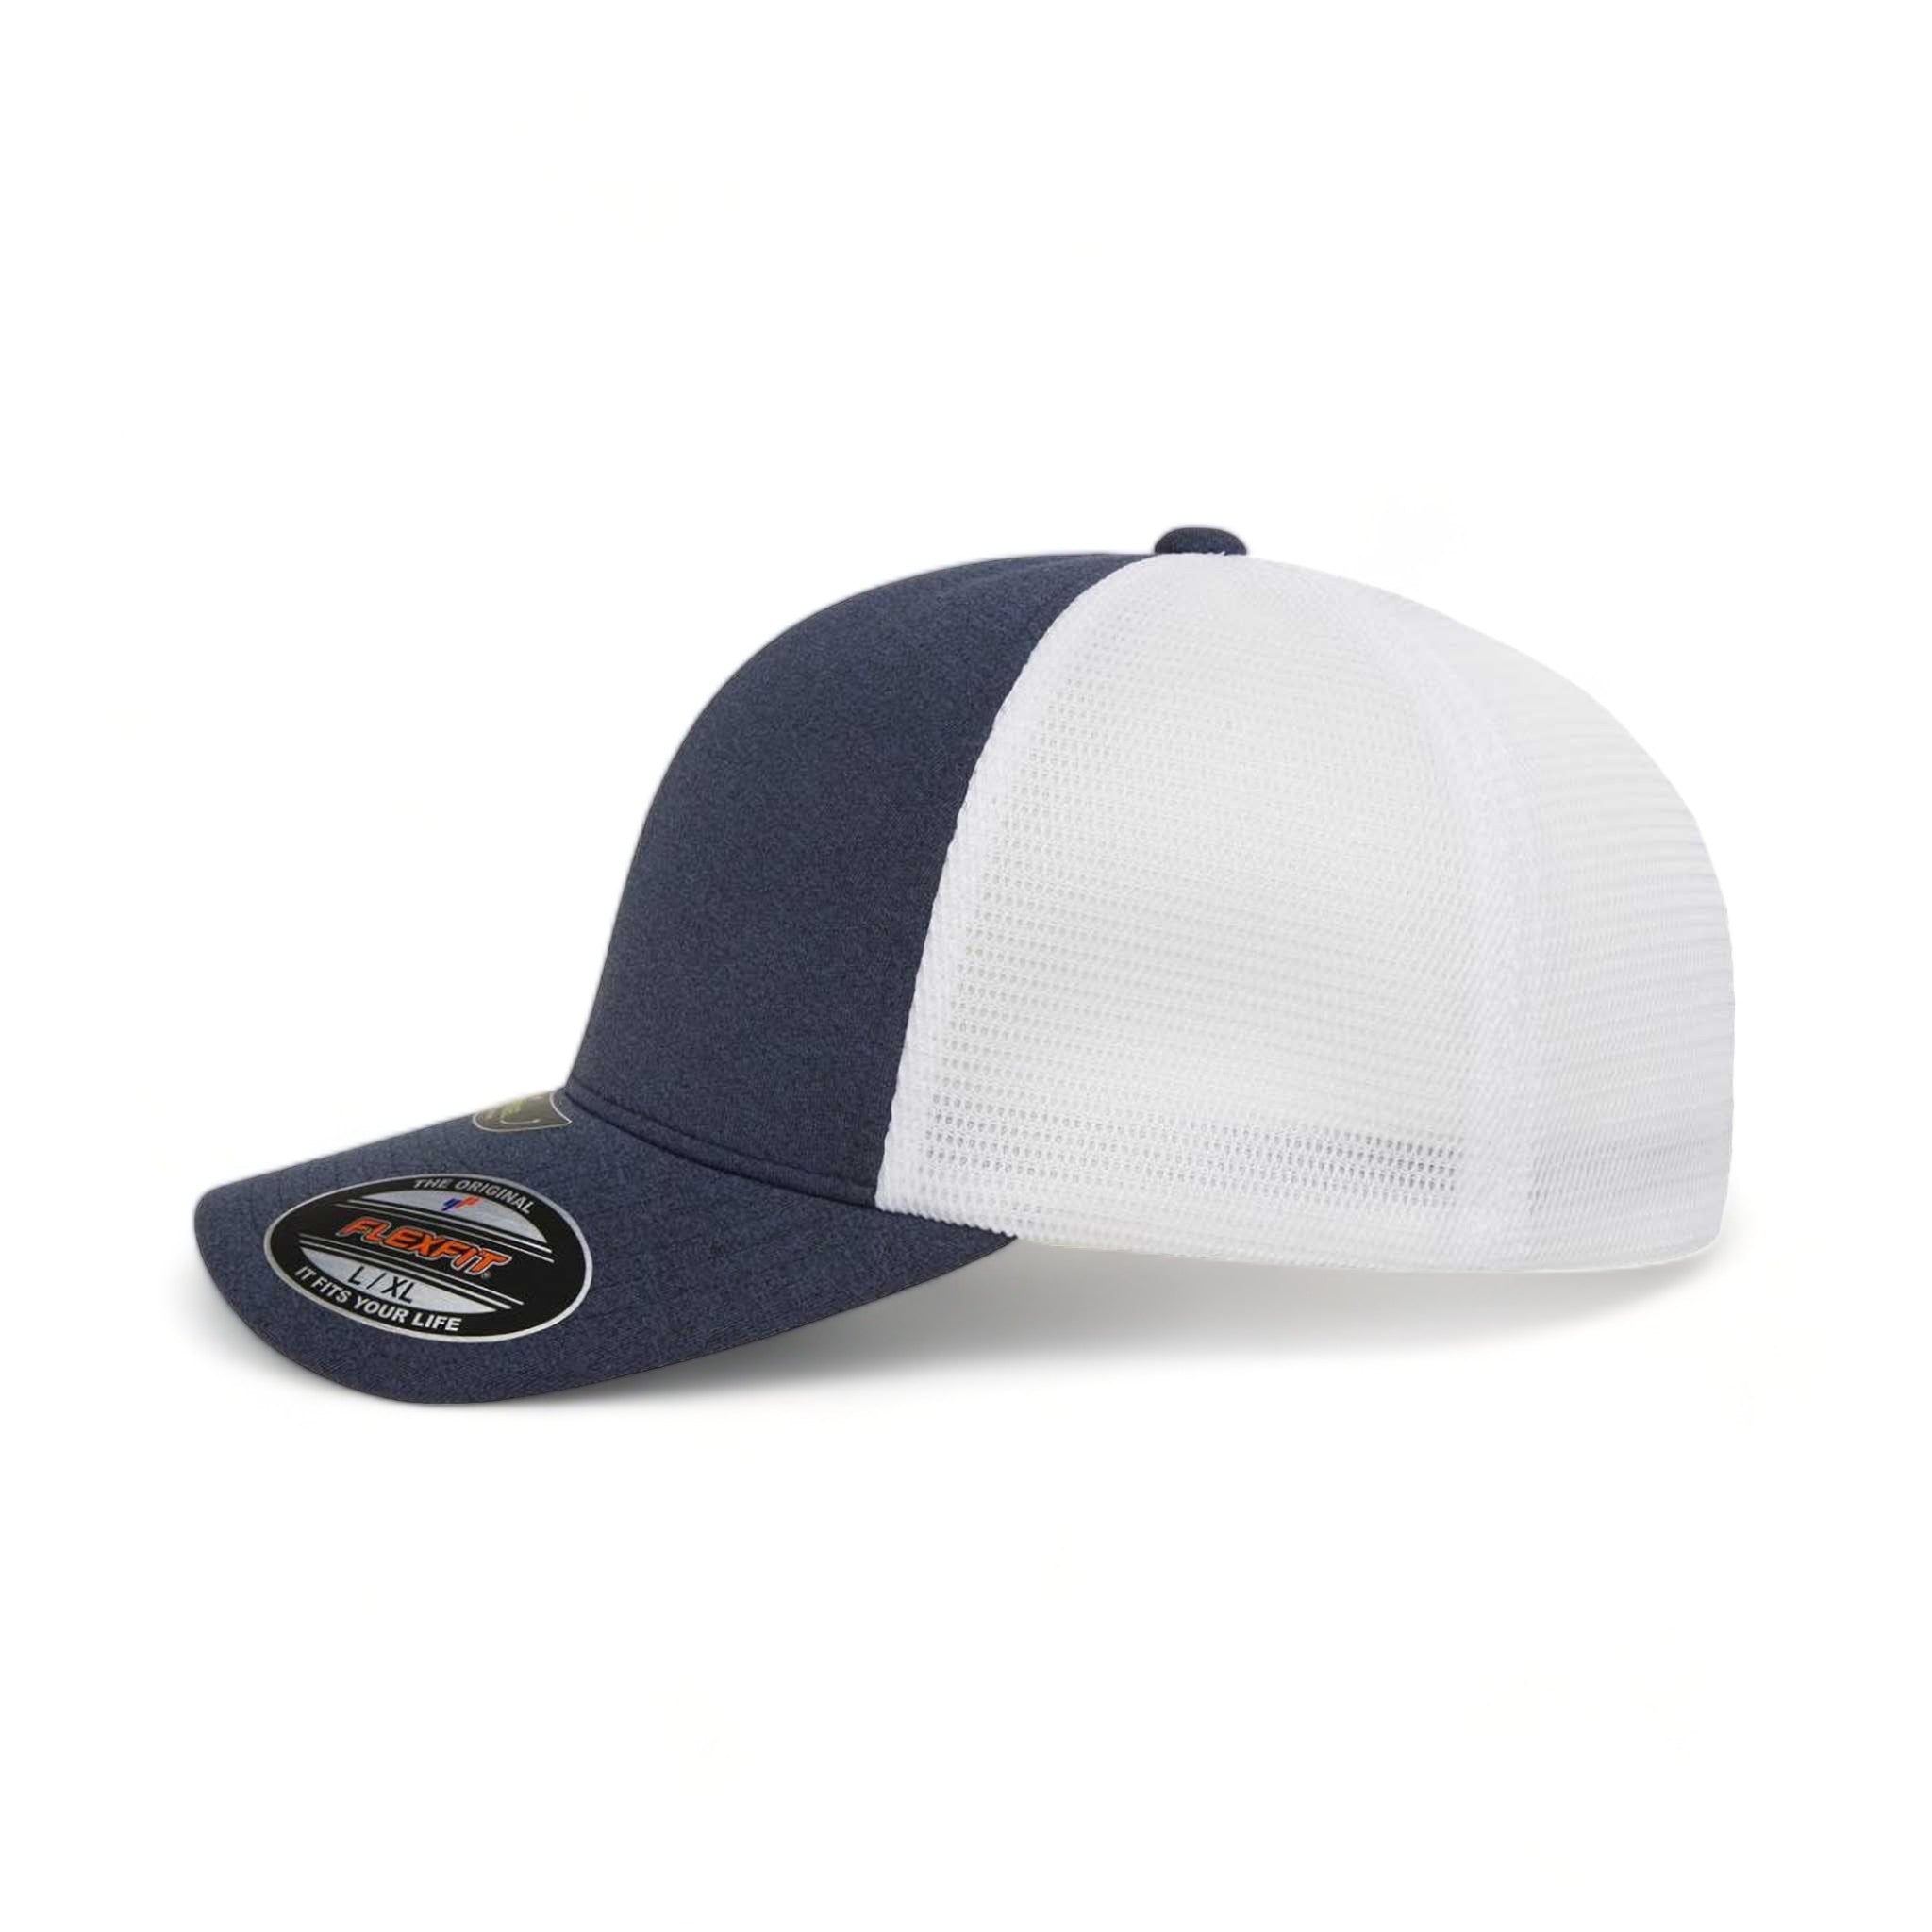 Side view of Flexfit 5511UP custom hat in mélange navy and white